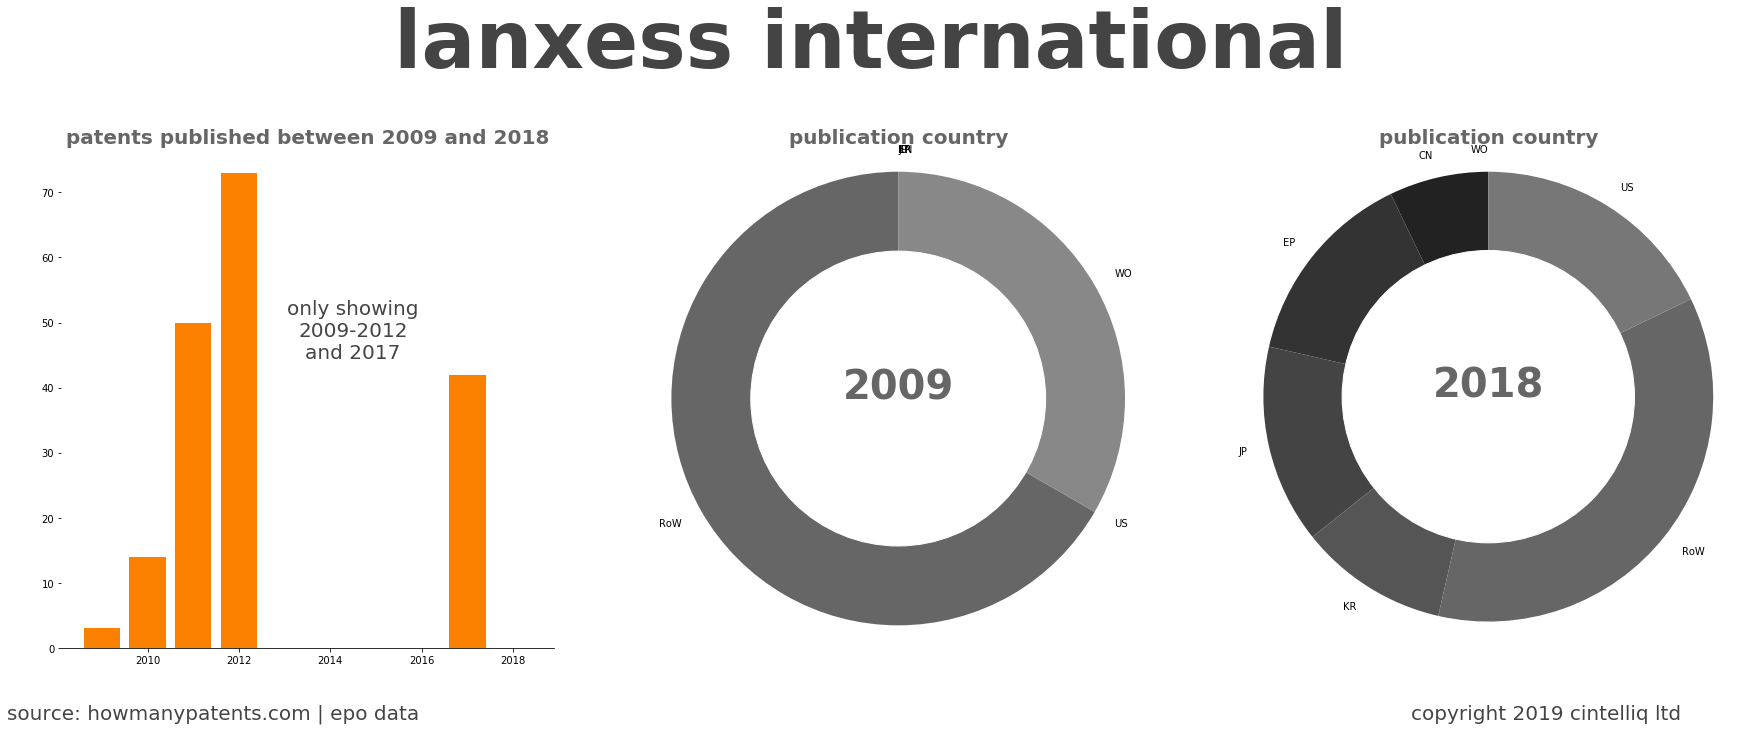 summary of patents for Lanxess International